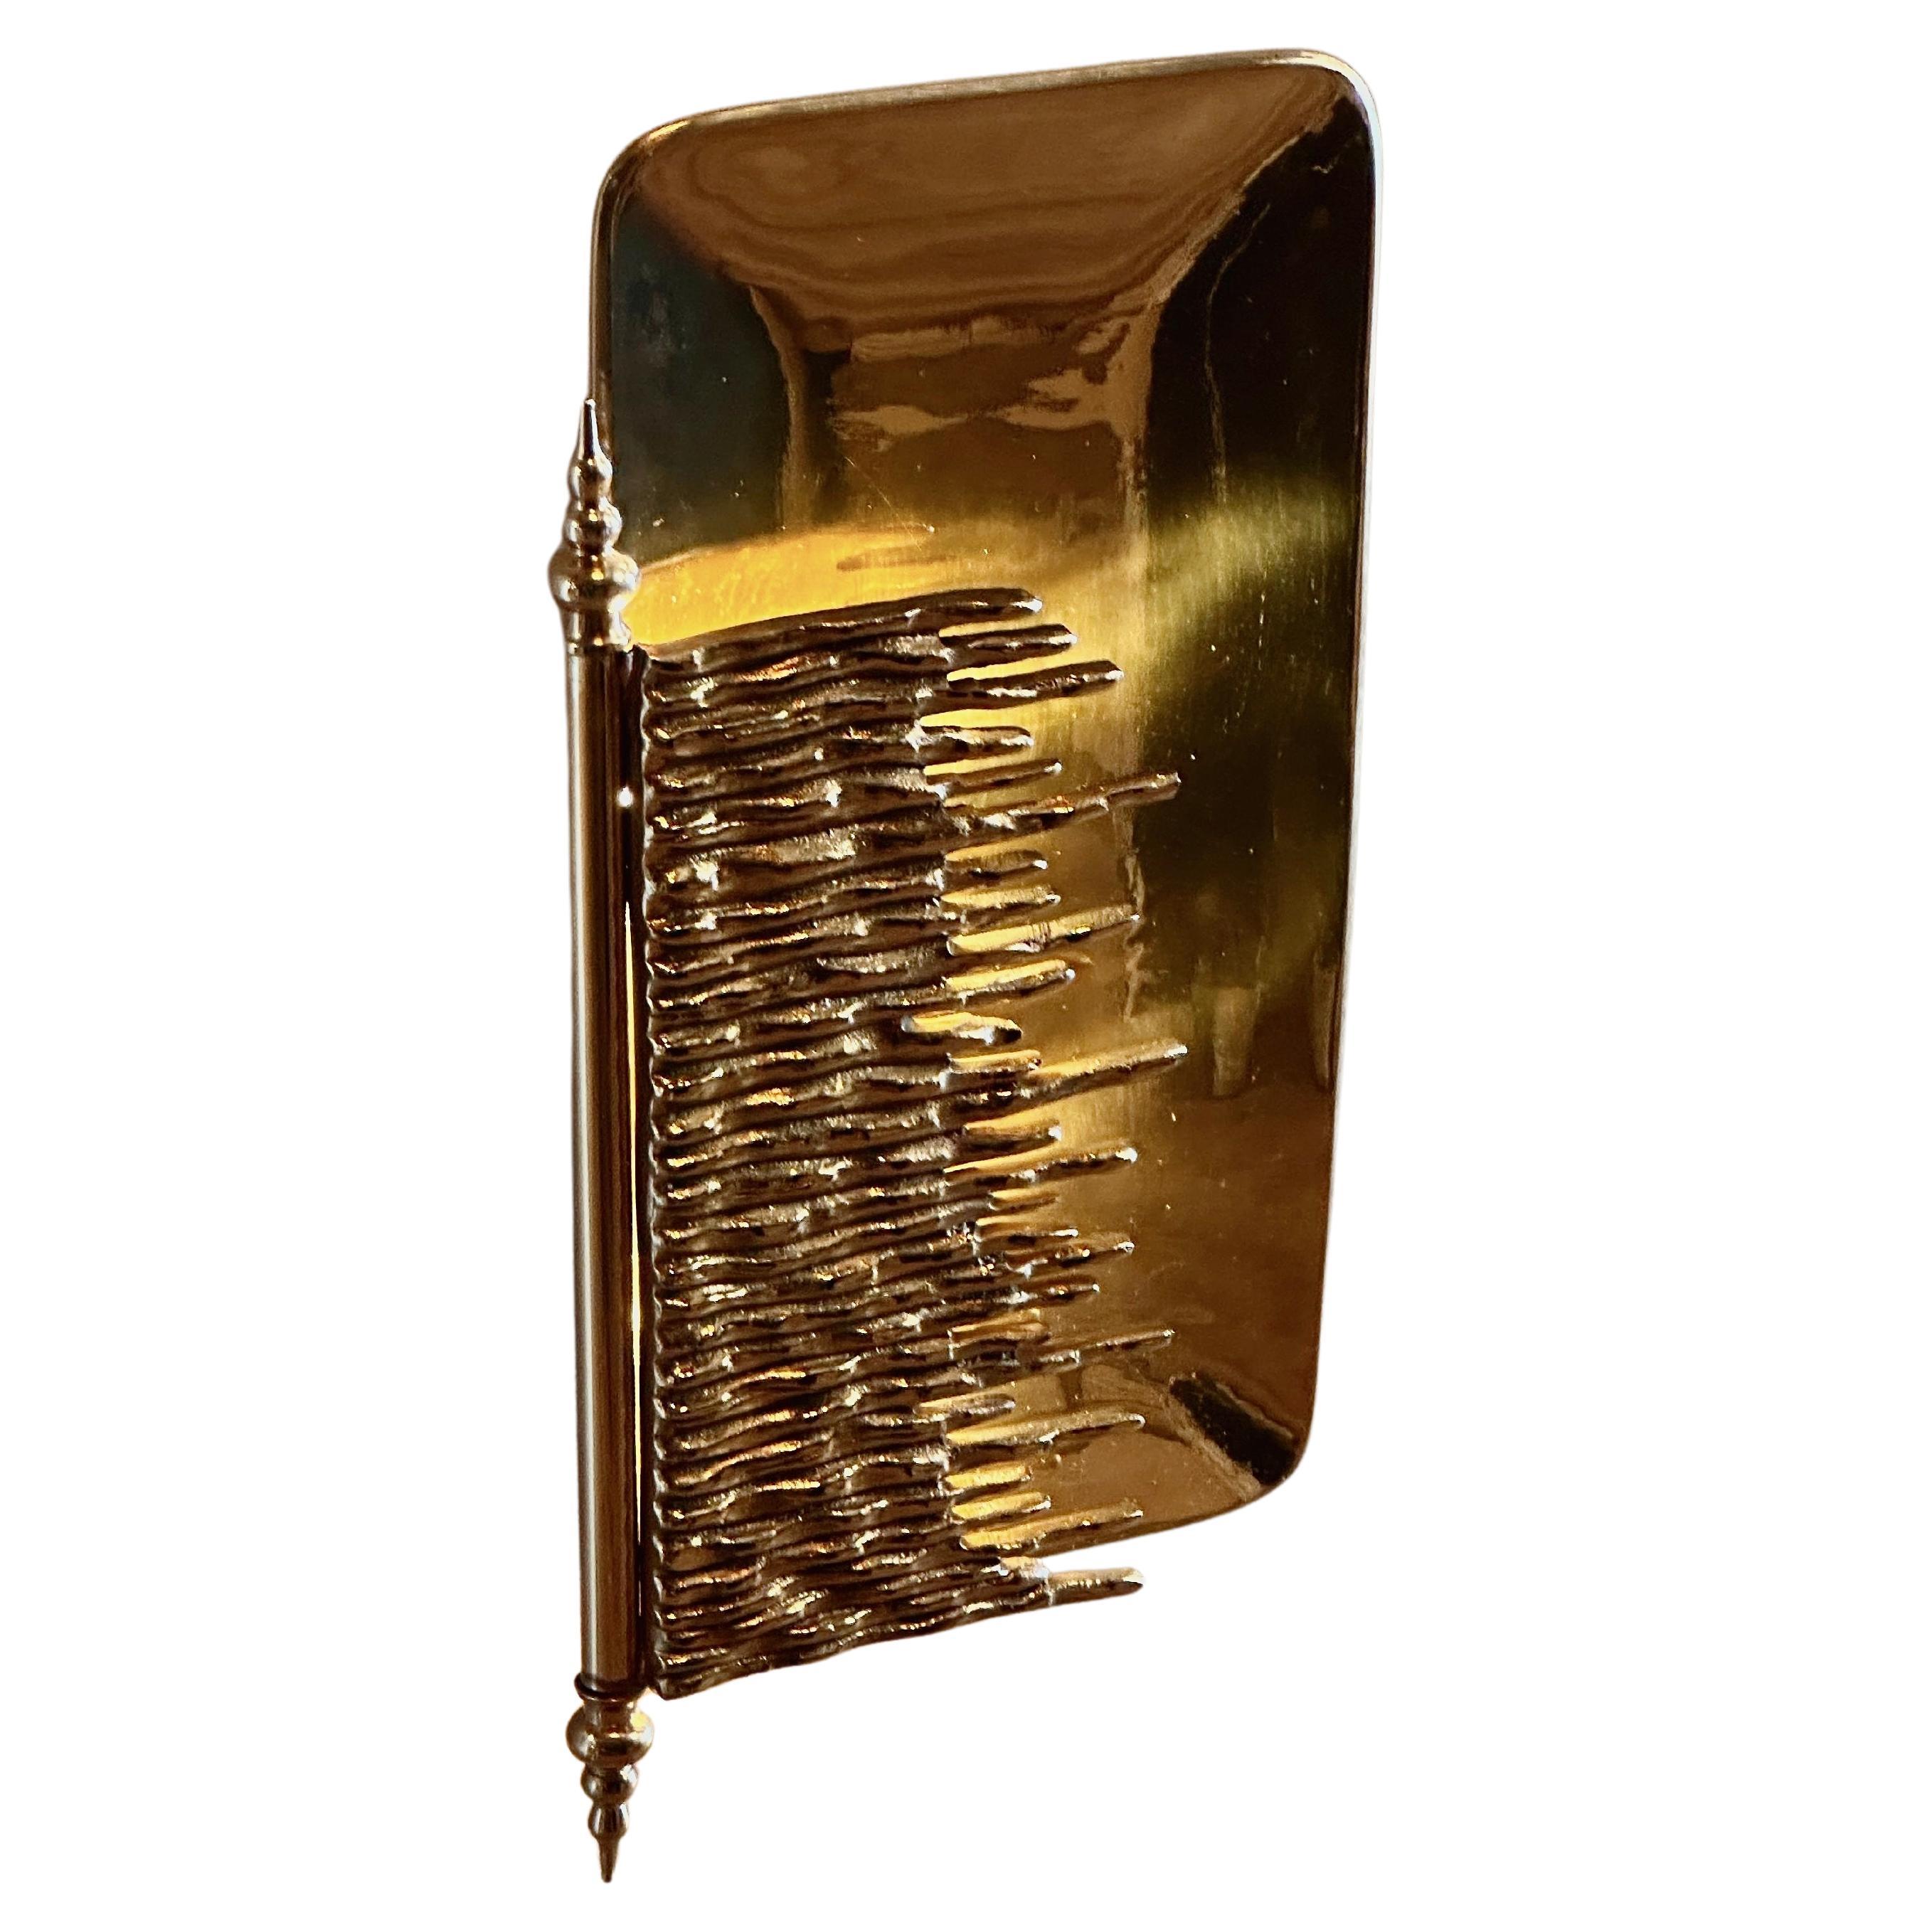 Behold NUORO brass wall sconce – a masterpiece of unparalleled beauty and illumination, destined to be the focal point of any room it graces. Crafted with meticulous attention to detail from the finest brass casting material, this sconce is more